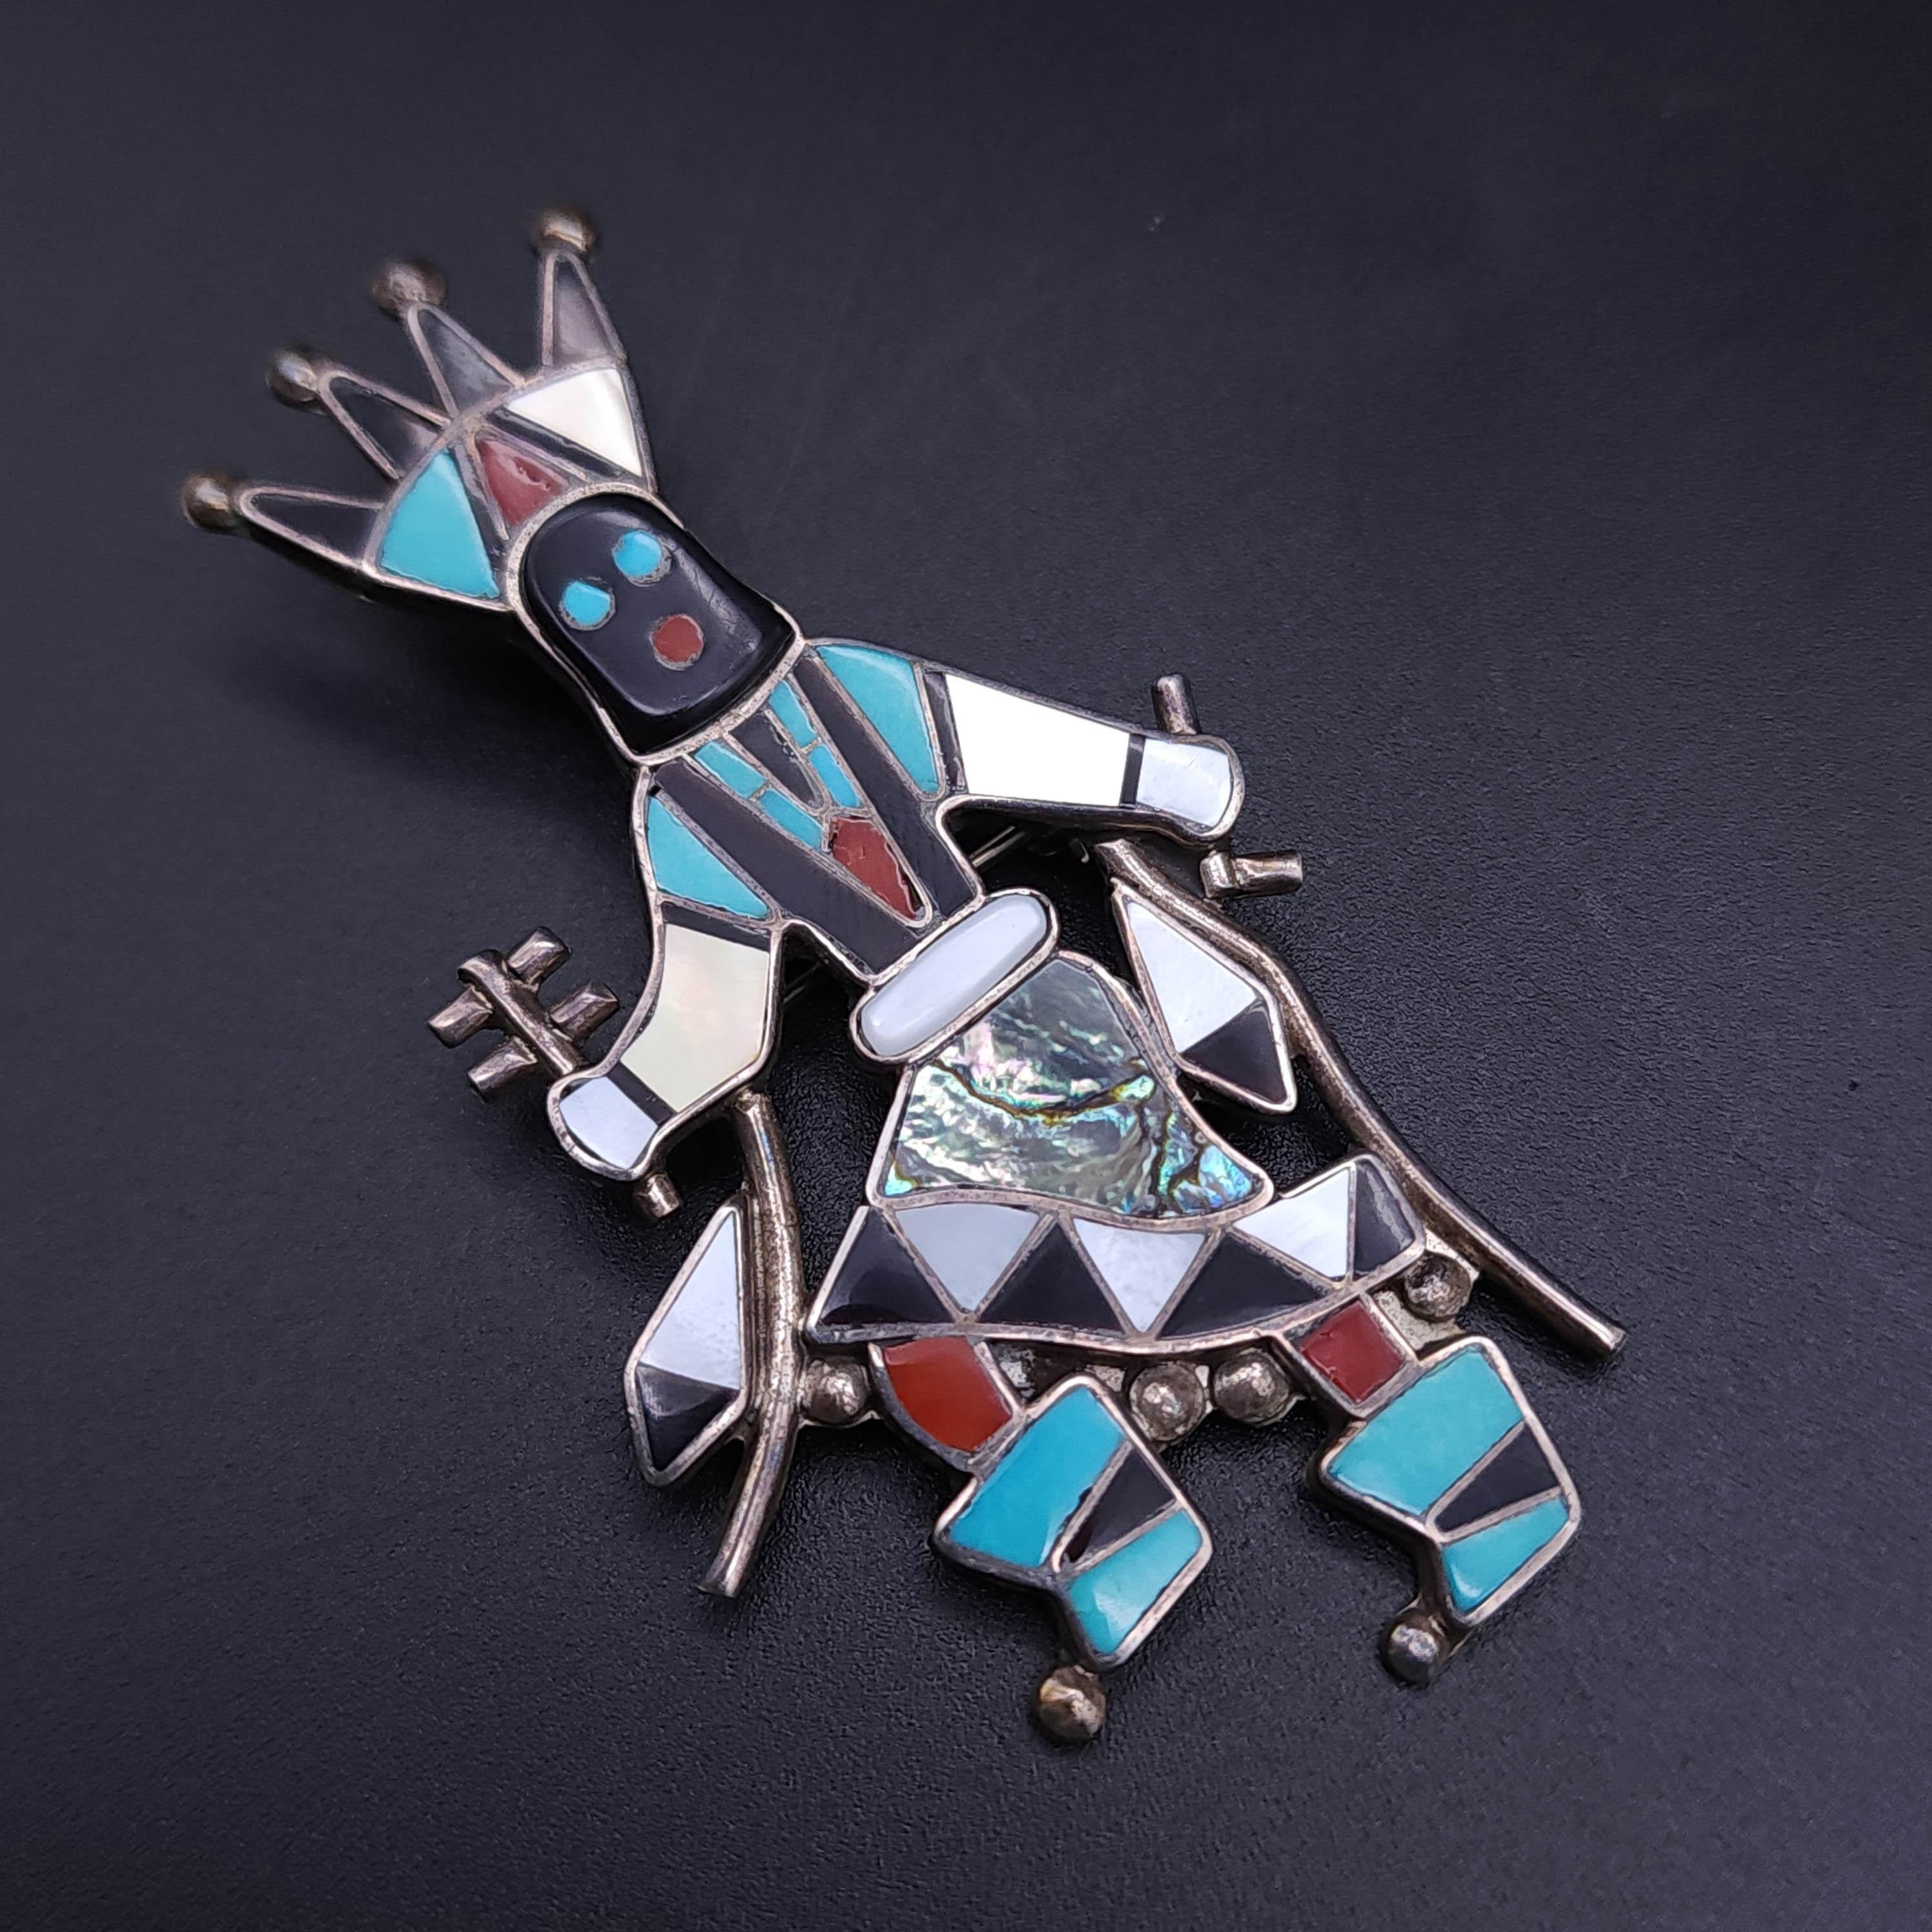 Embrace the rich cultural heritage with this meticulously crafted Zuni Native American Gan Dancer pin/pendant. This stunning piece features a traditional Gan Dancer, symbolizing the revered messengers between the human and spirit world. Set in